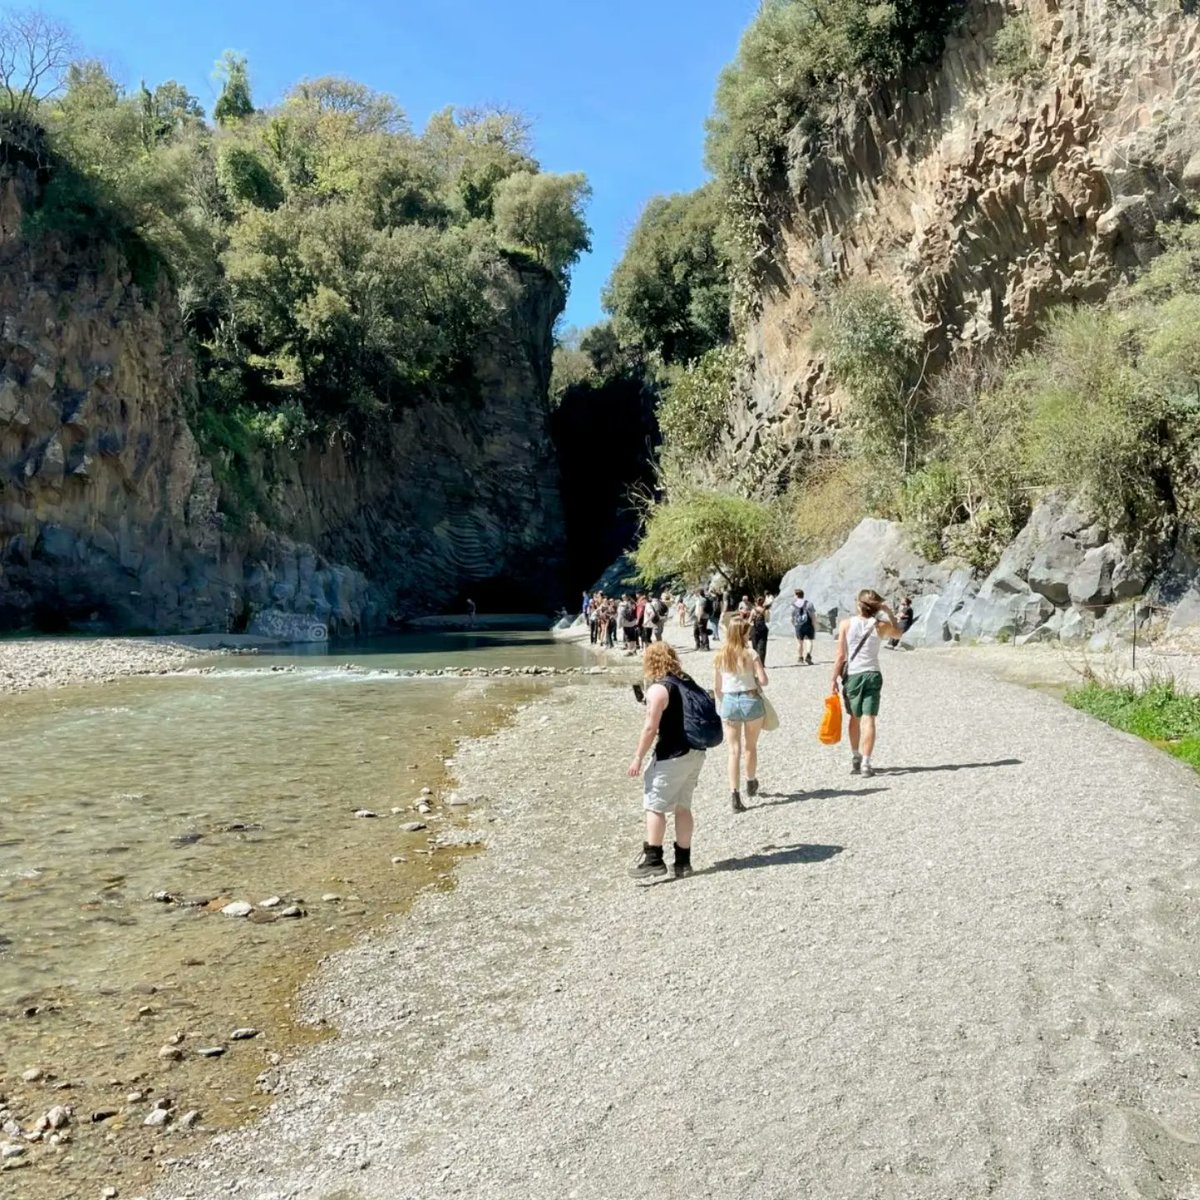 Some shots from the BSc Geography and Environment day on Tuesday, here in Sicily. On this day students were focused on understanding fluvial geomorphology at different points of the river's course 🏞️